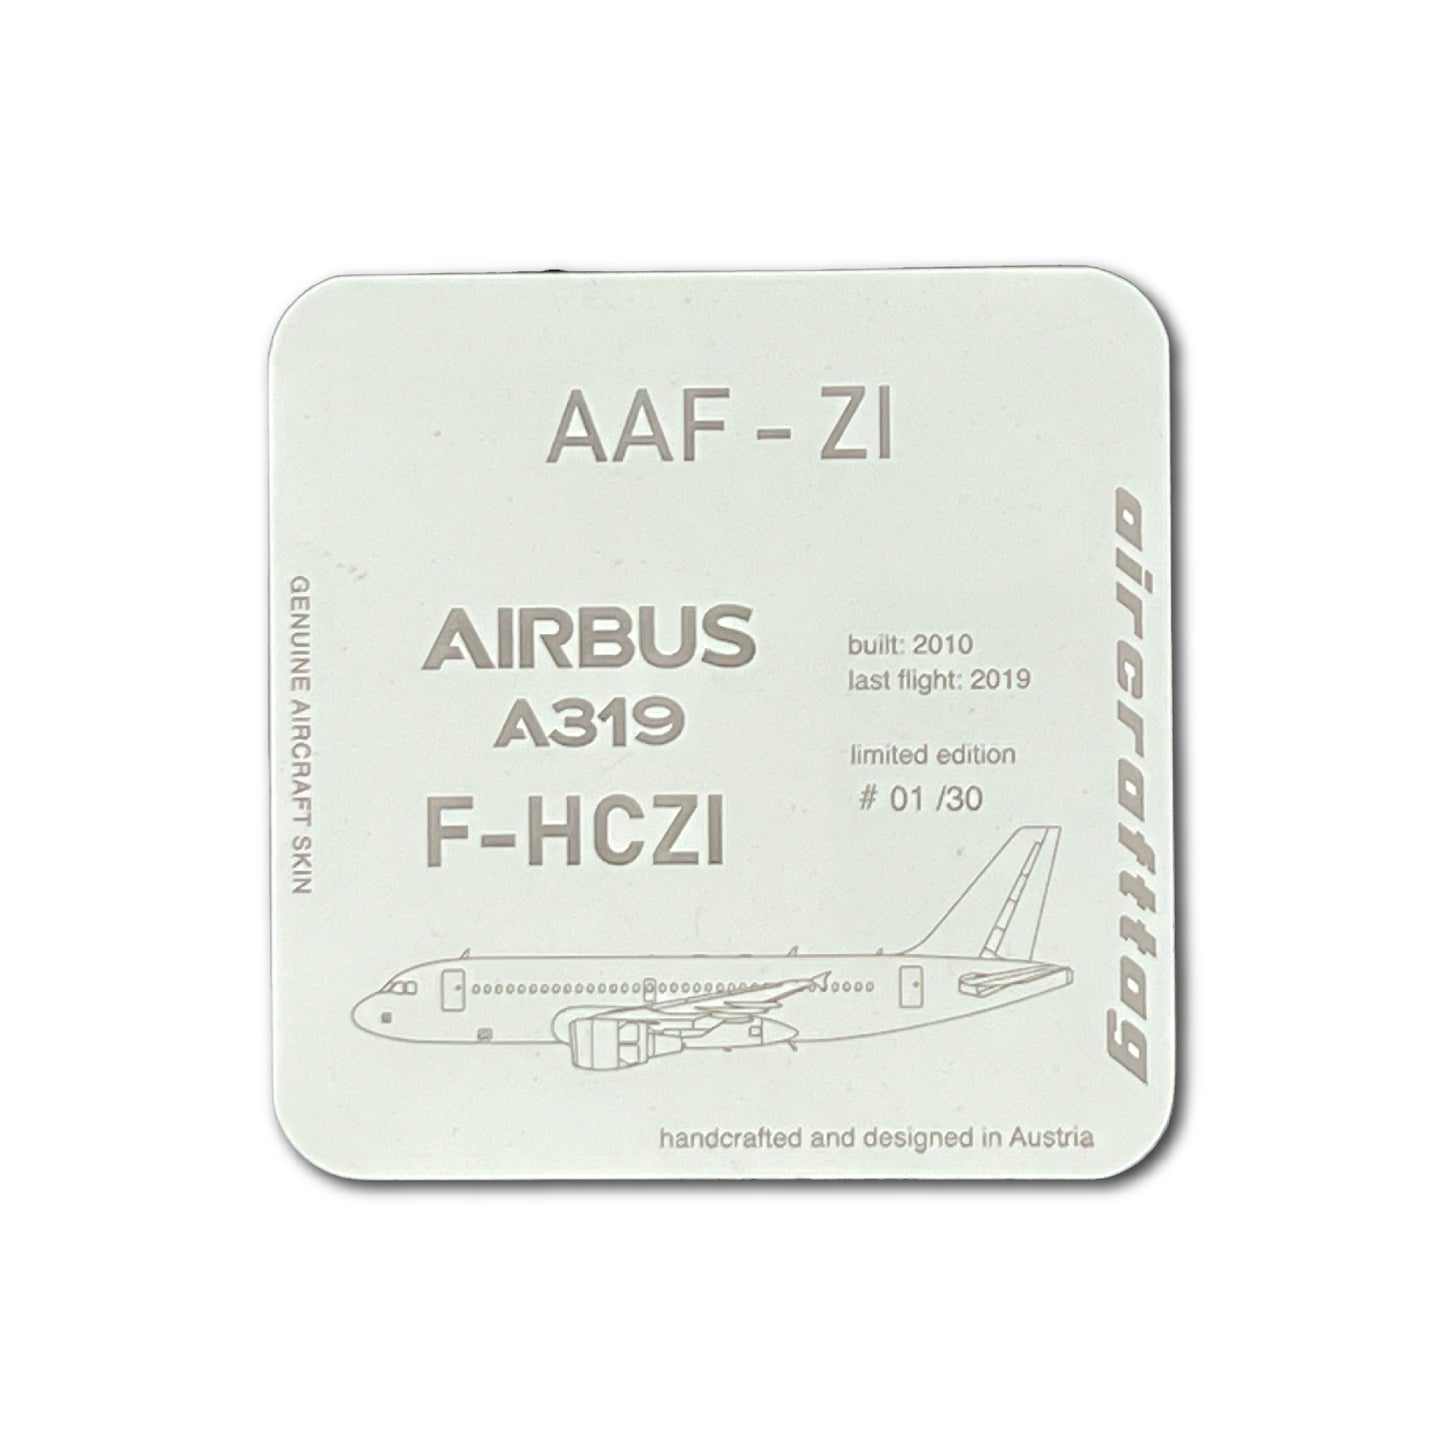 coaster Airbus A319 - Aigle Azur - F-HCZI "HISTORY COLLECTION